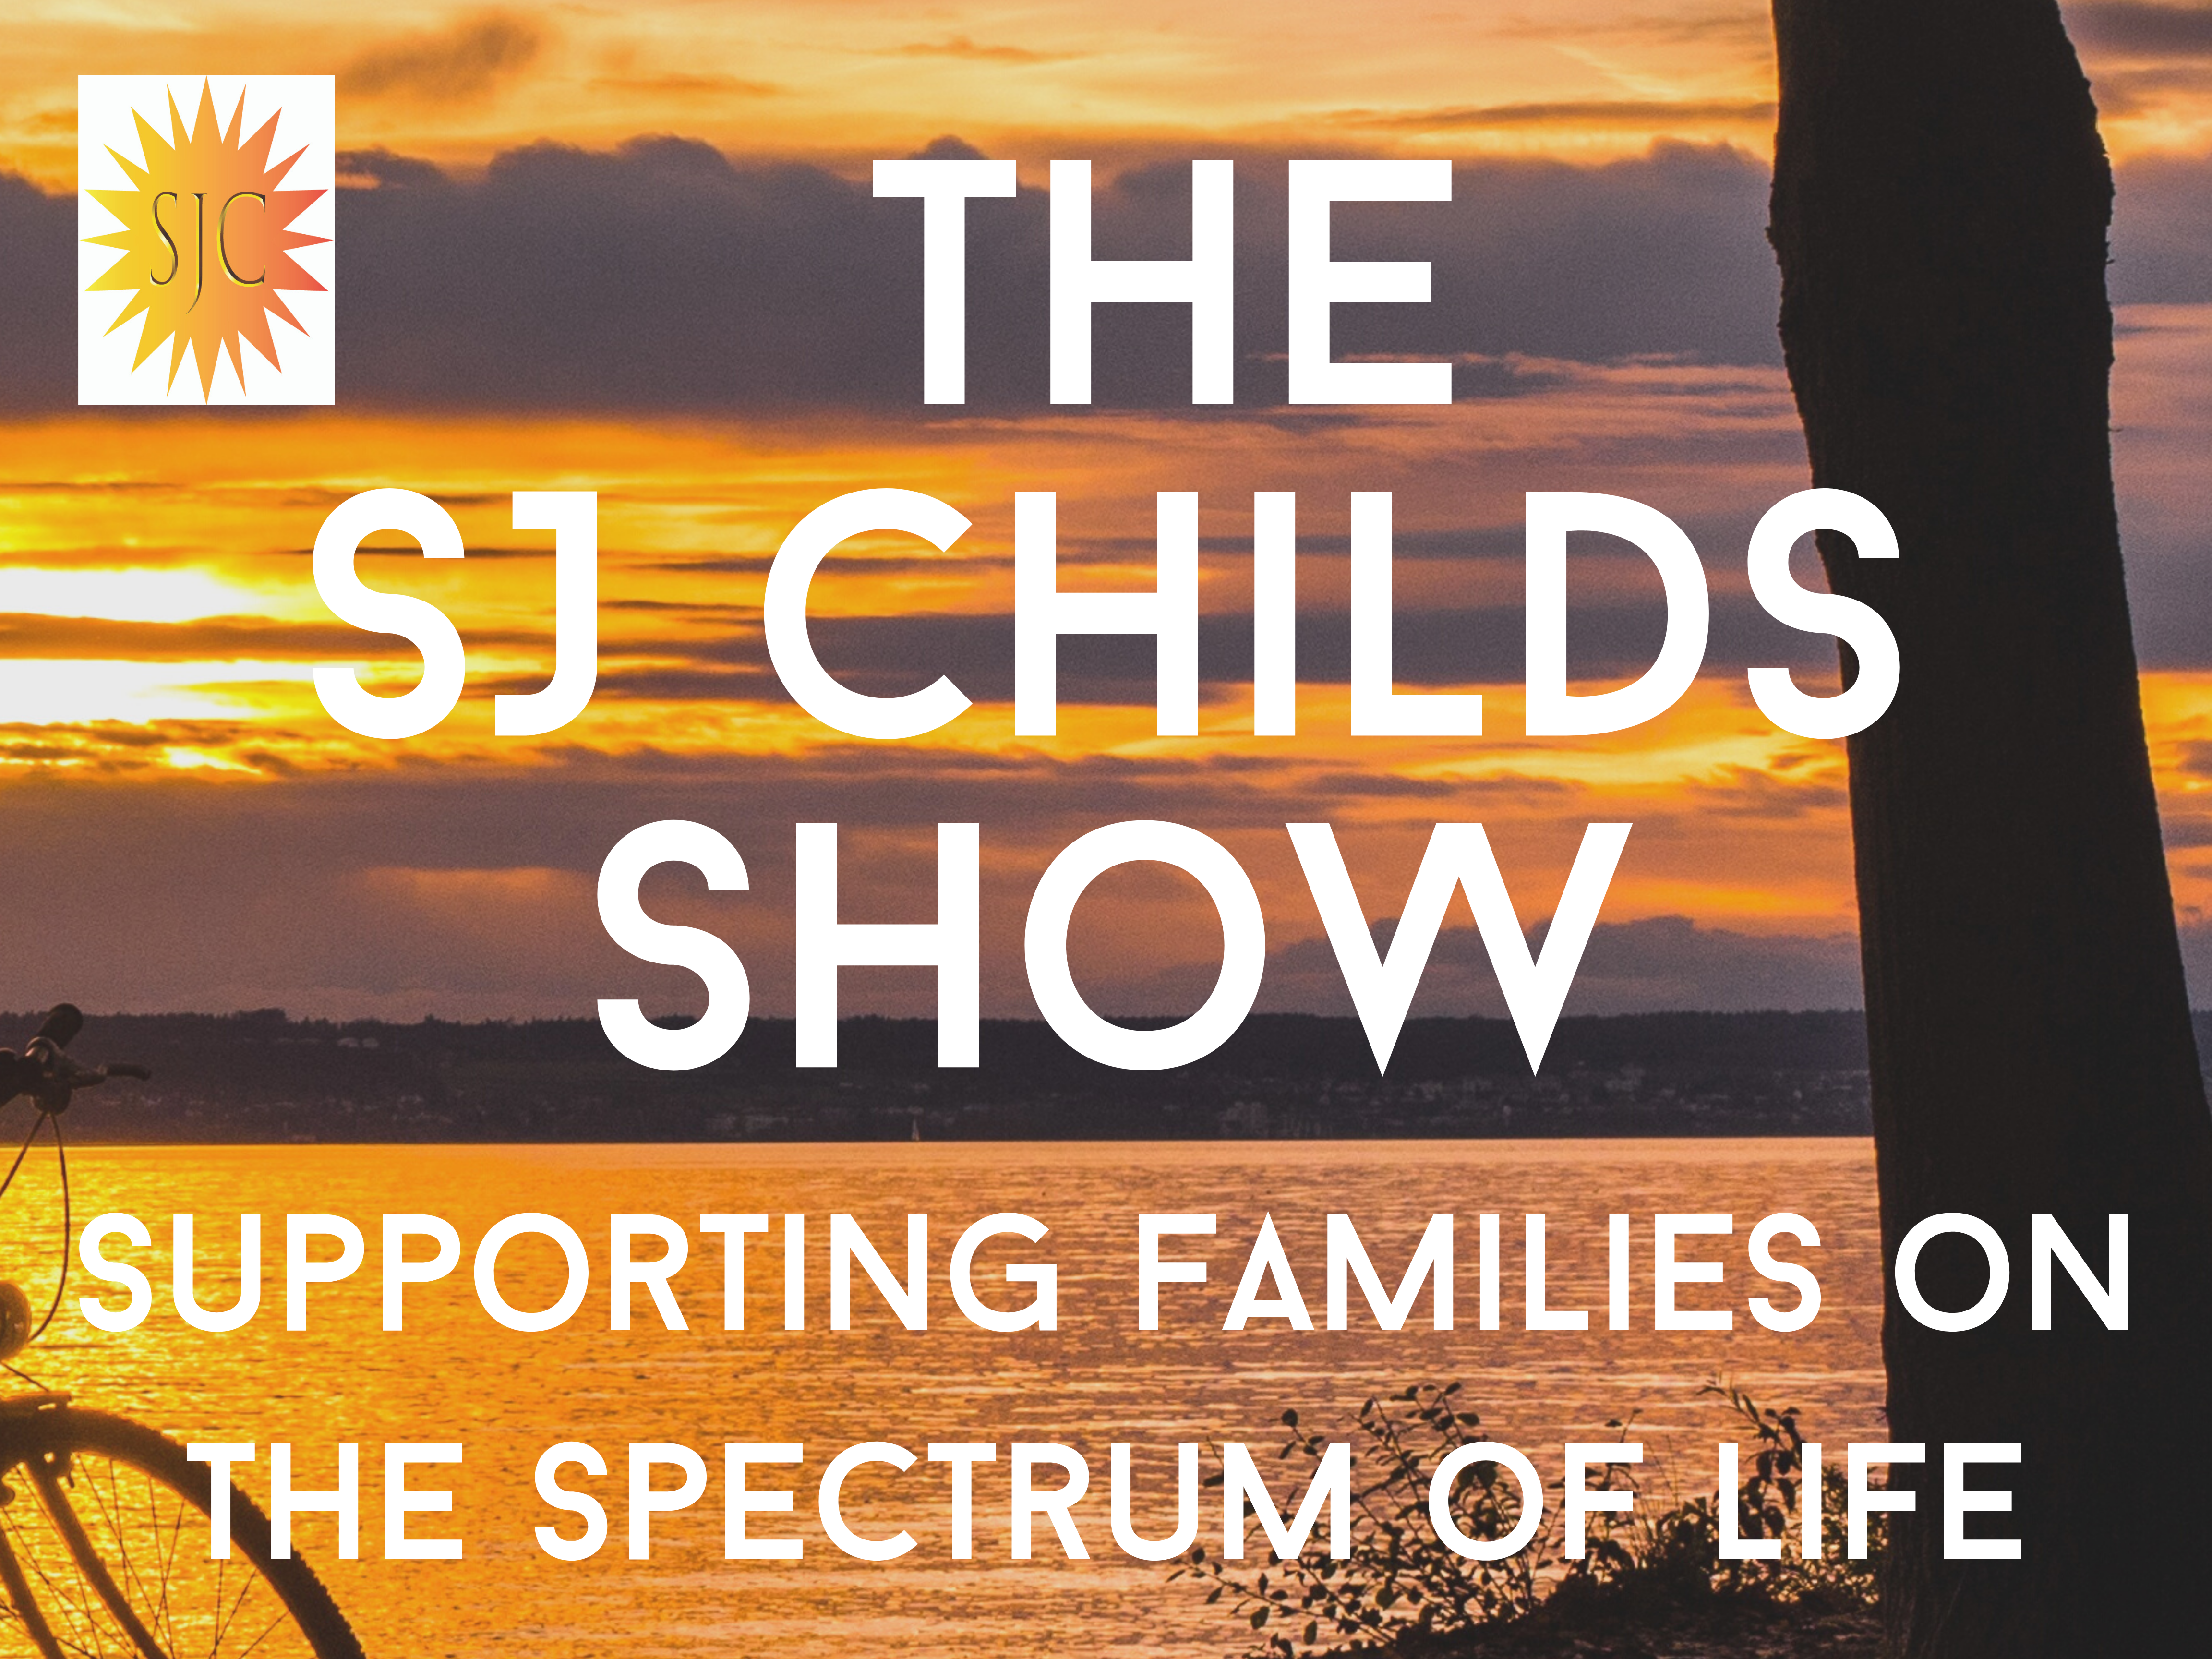 THE SJ CHILDS SHOW